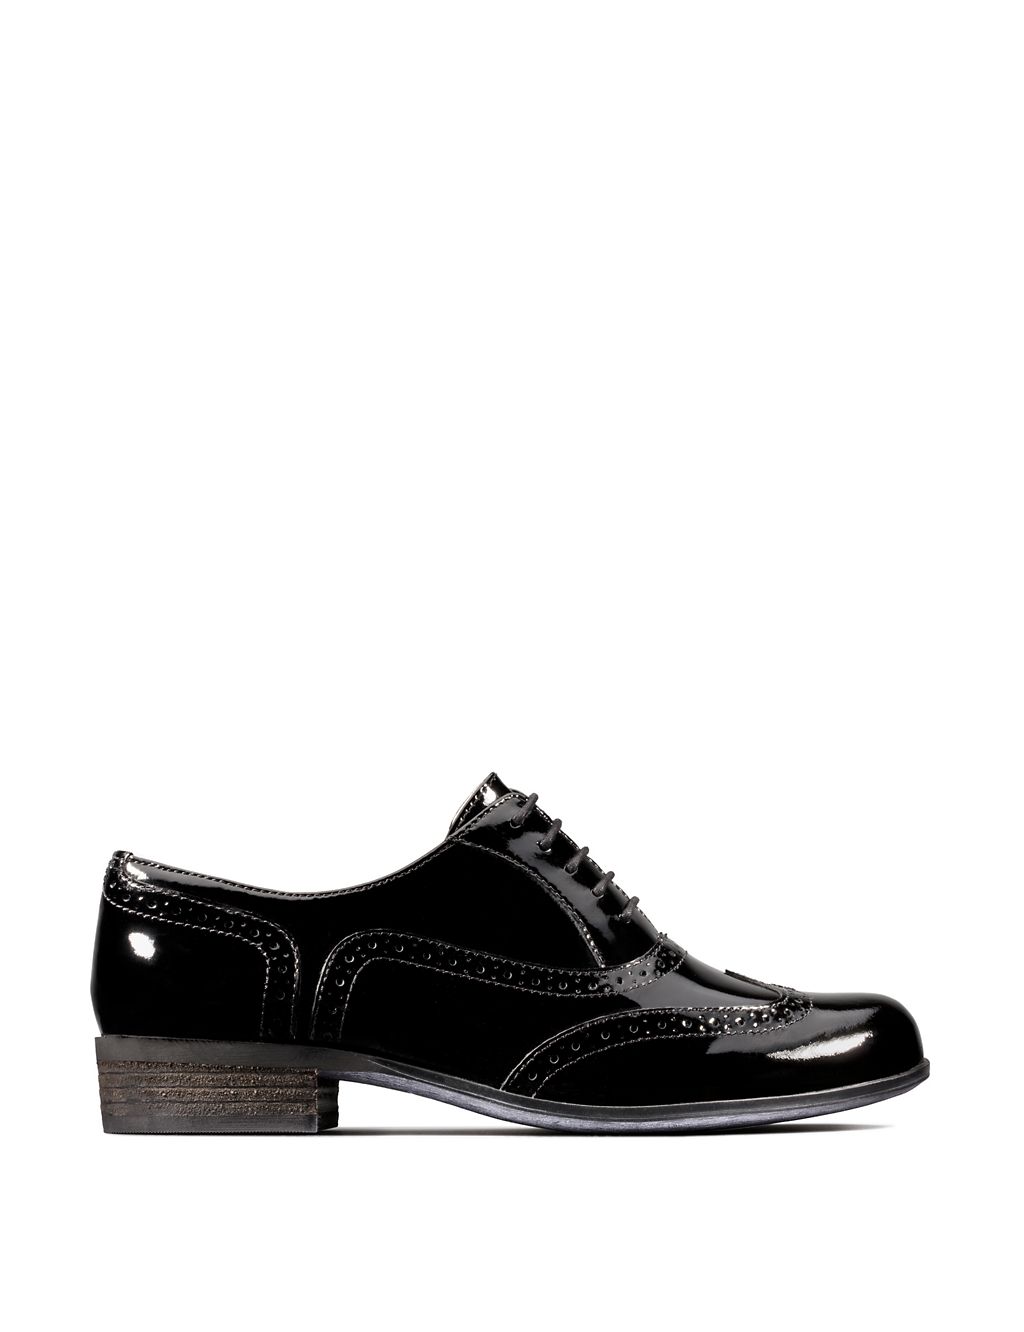 Wide Fit Leather Patent Brogues 3 of 7